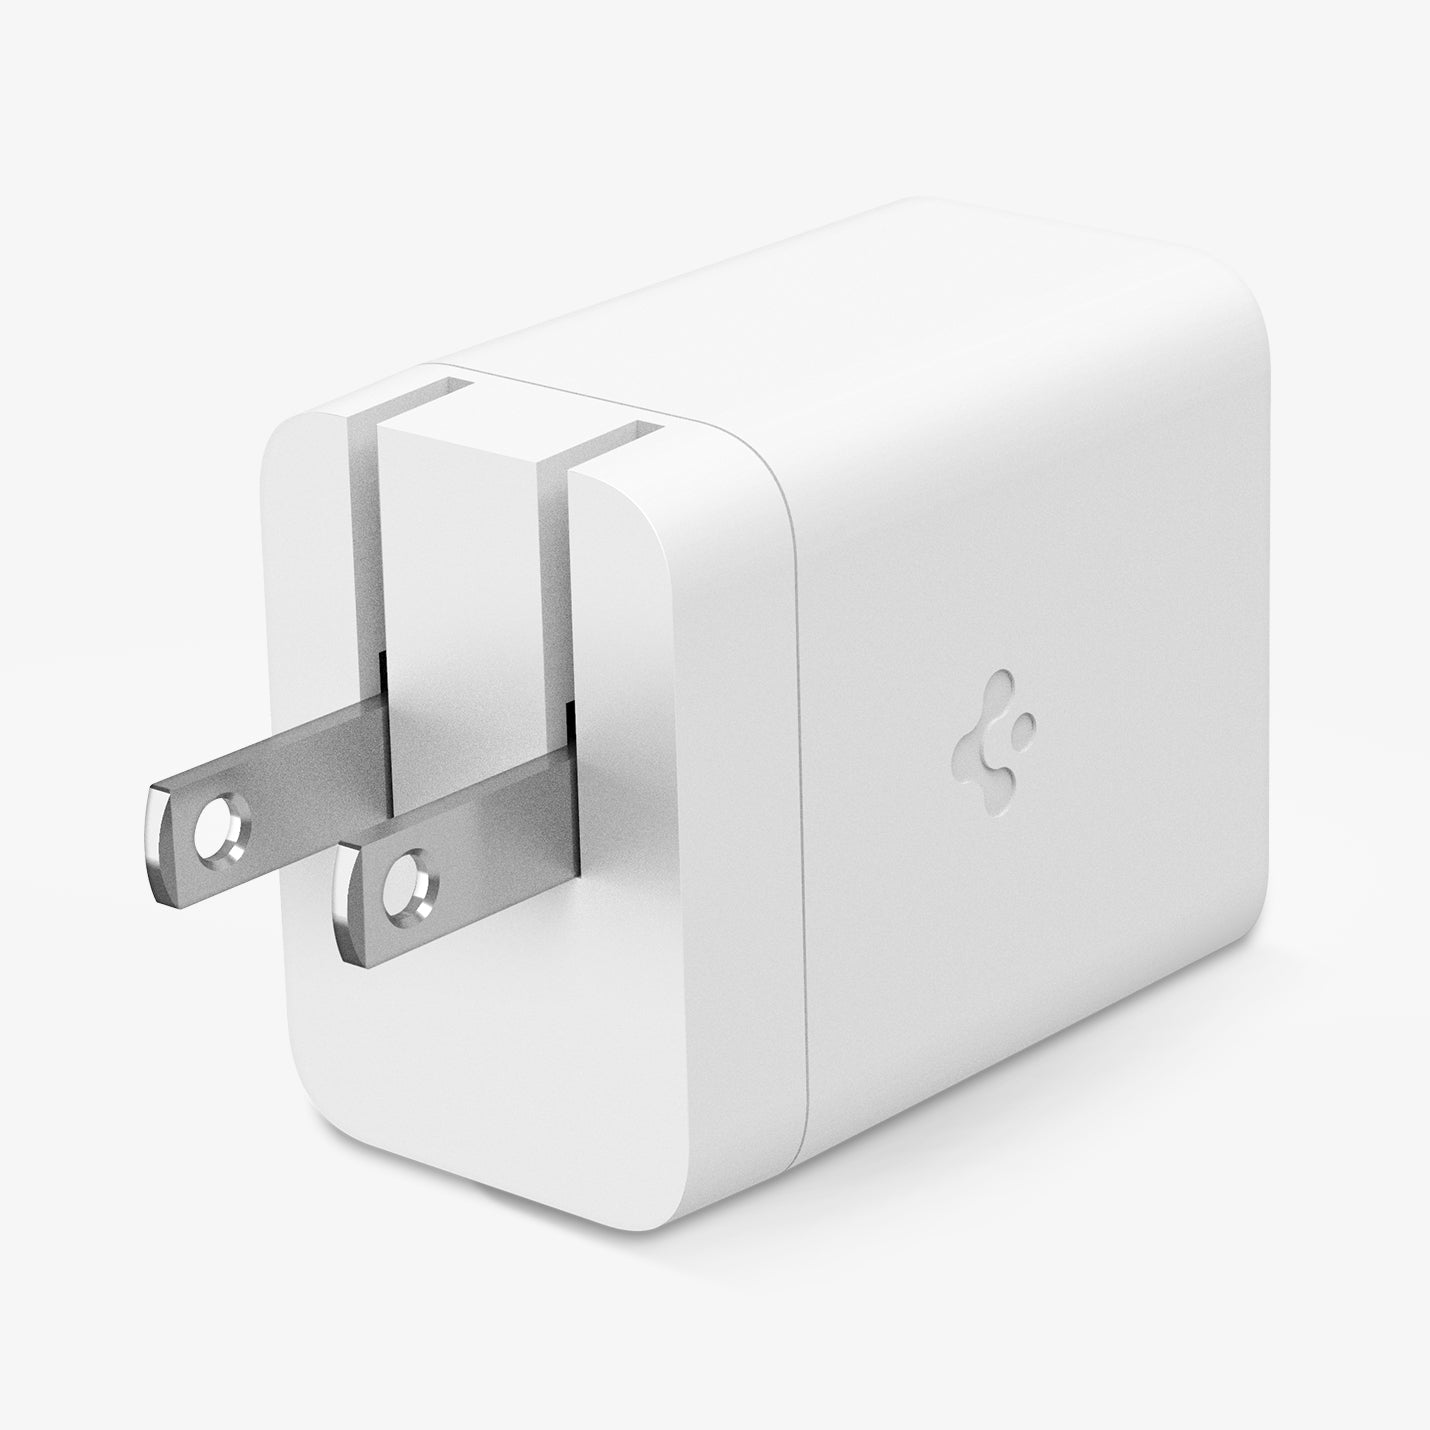 ACH05474 - ArcStation™ Pro GaN 651 Wall Charger PE2201 in White showing the sides and bottom with the plug sticking out